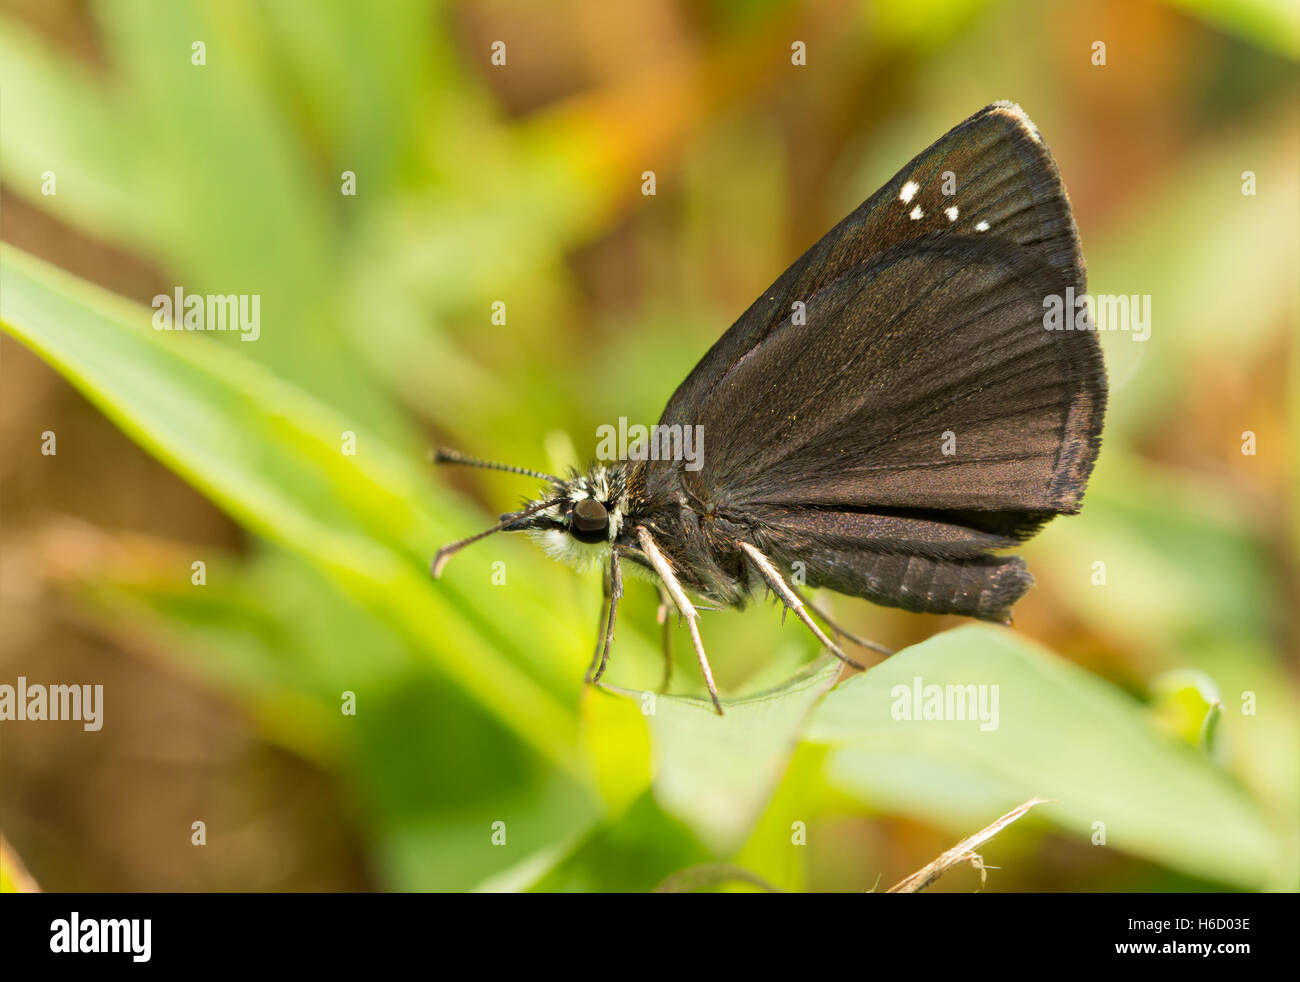 Ventral view of a tiny Common Sootywing butterfly resting on a blade of grass Stock Photo